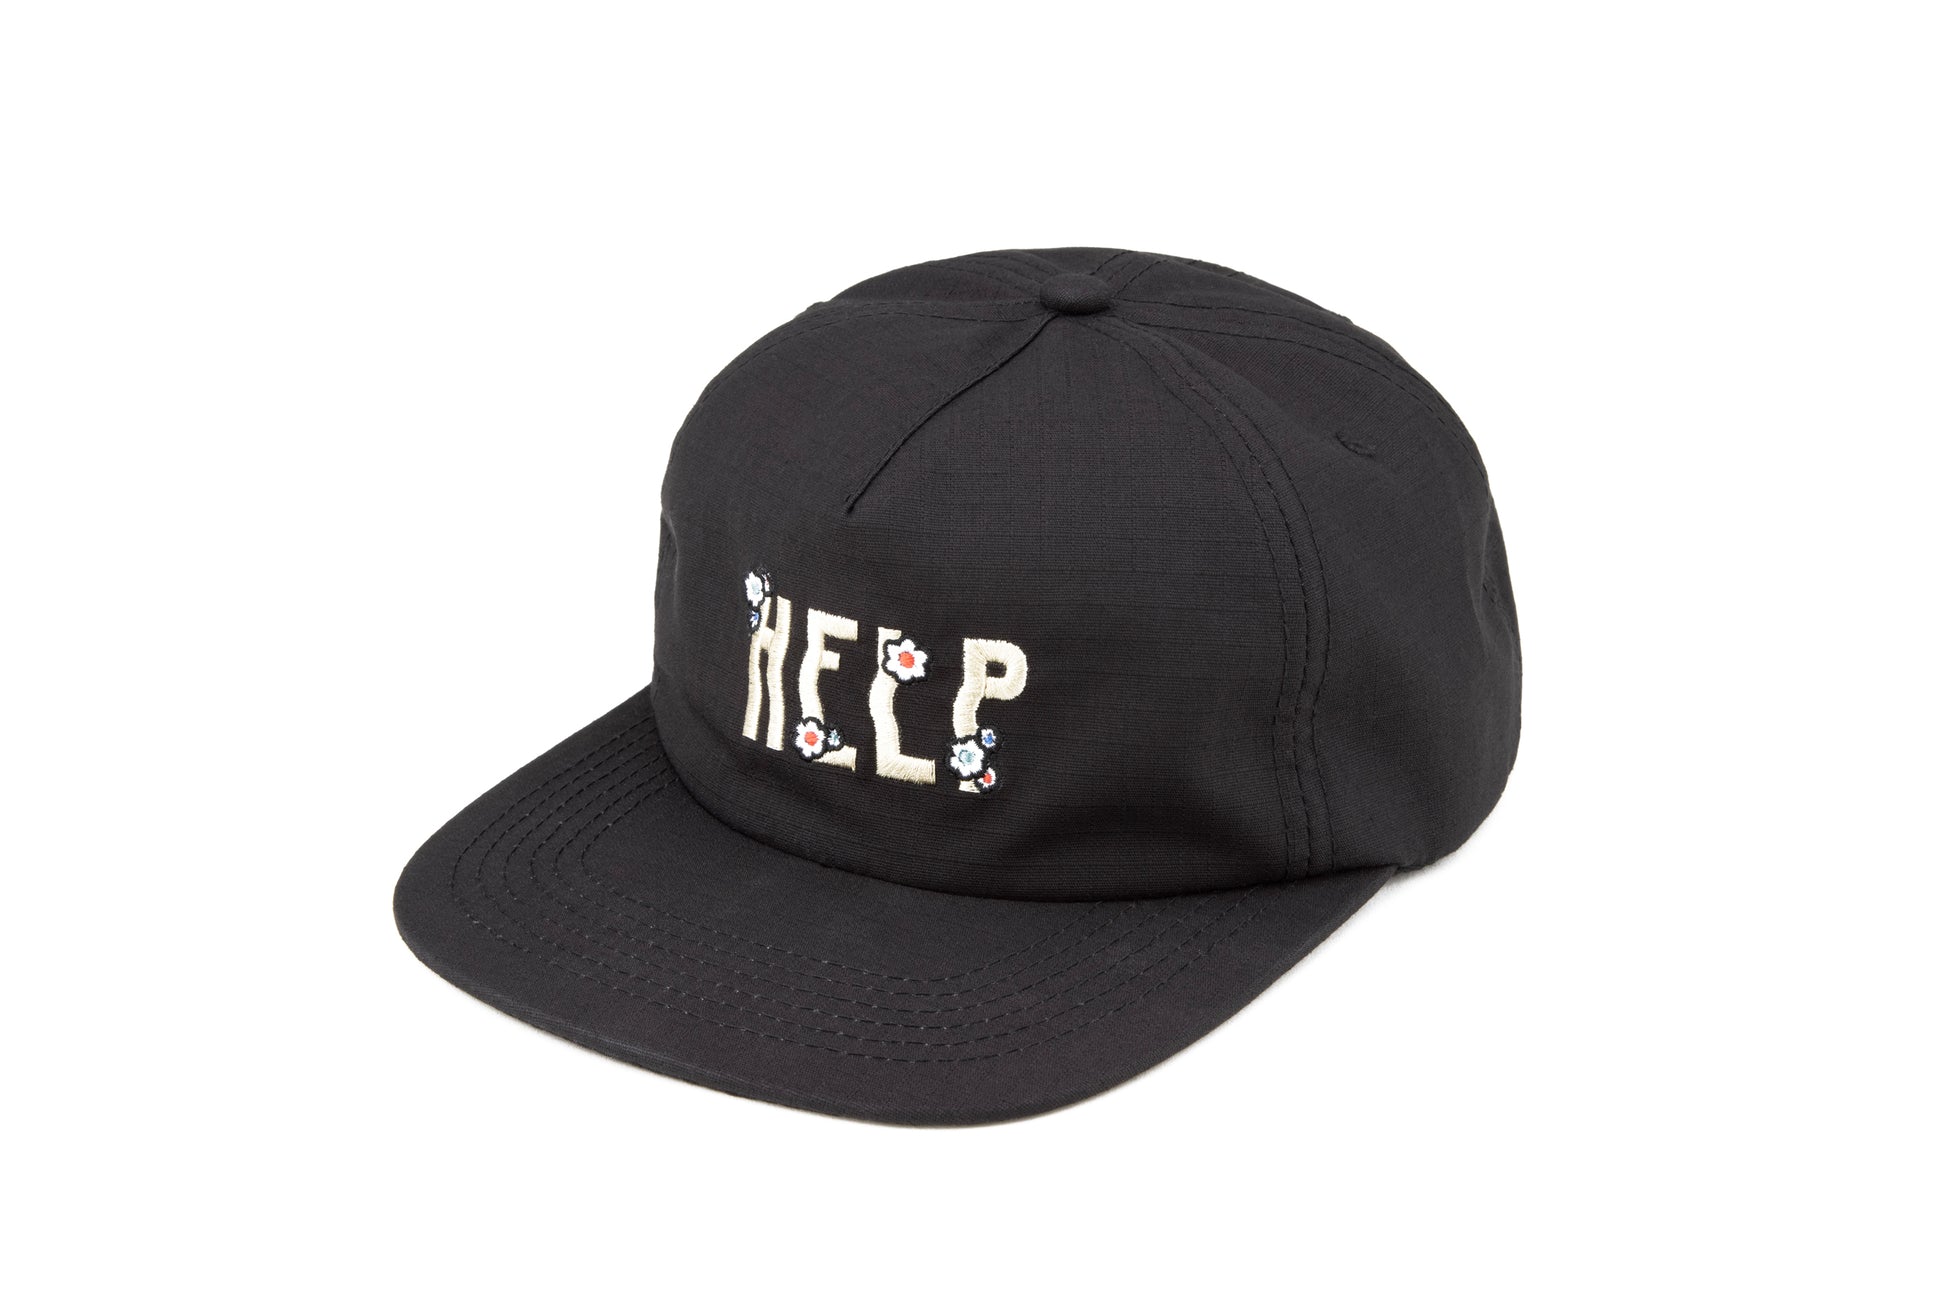 Black 5 panel hat with an embroidered design that says "Help" on the front. The design includes flower embroidery on top of each letter. The material is ripstop cotton. 